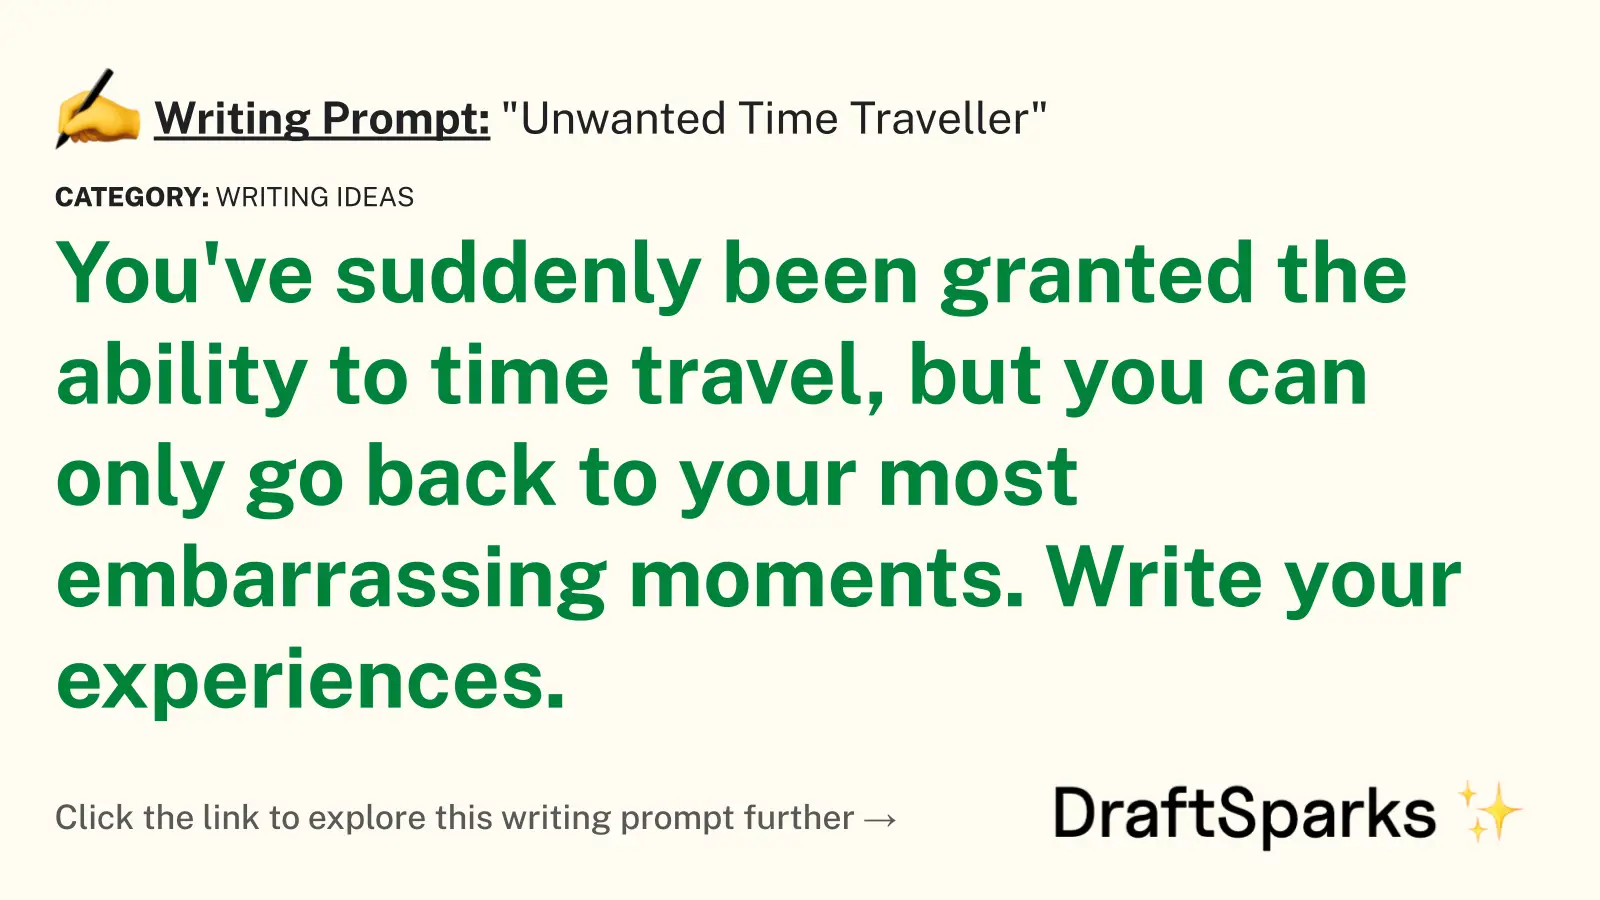 “Unwanted Time Traveller”